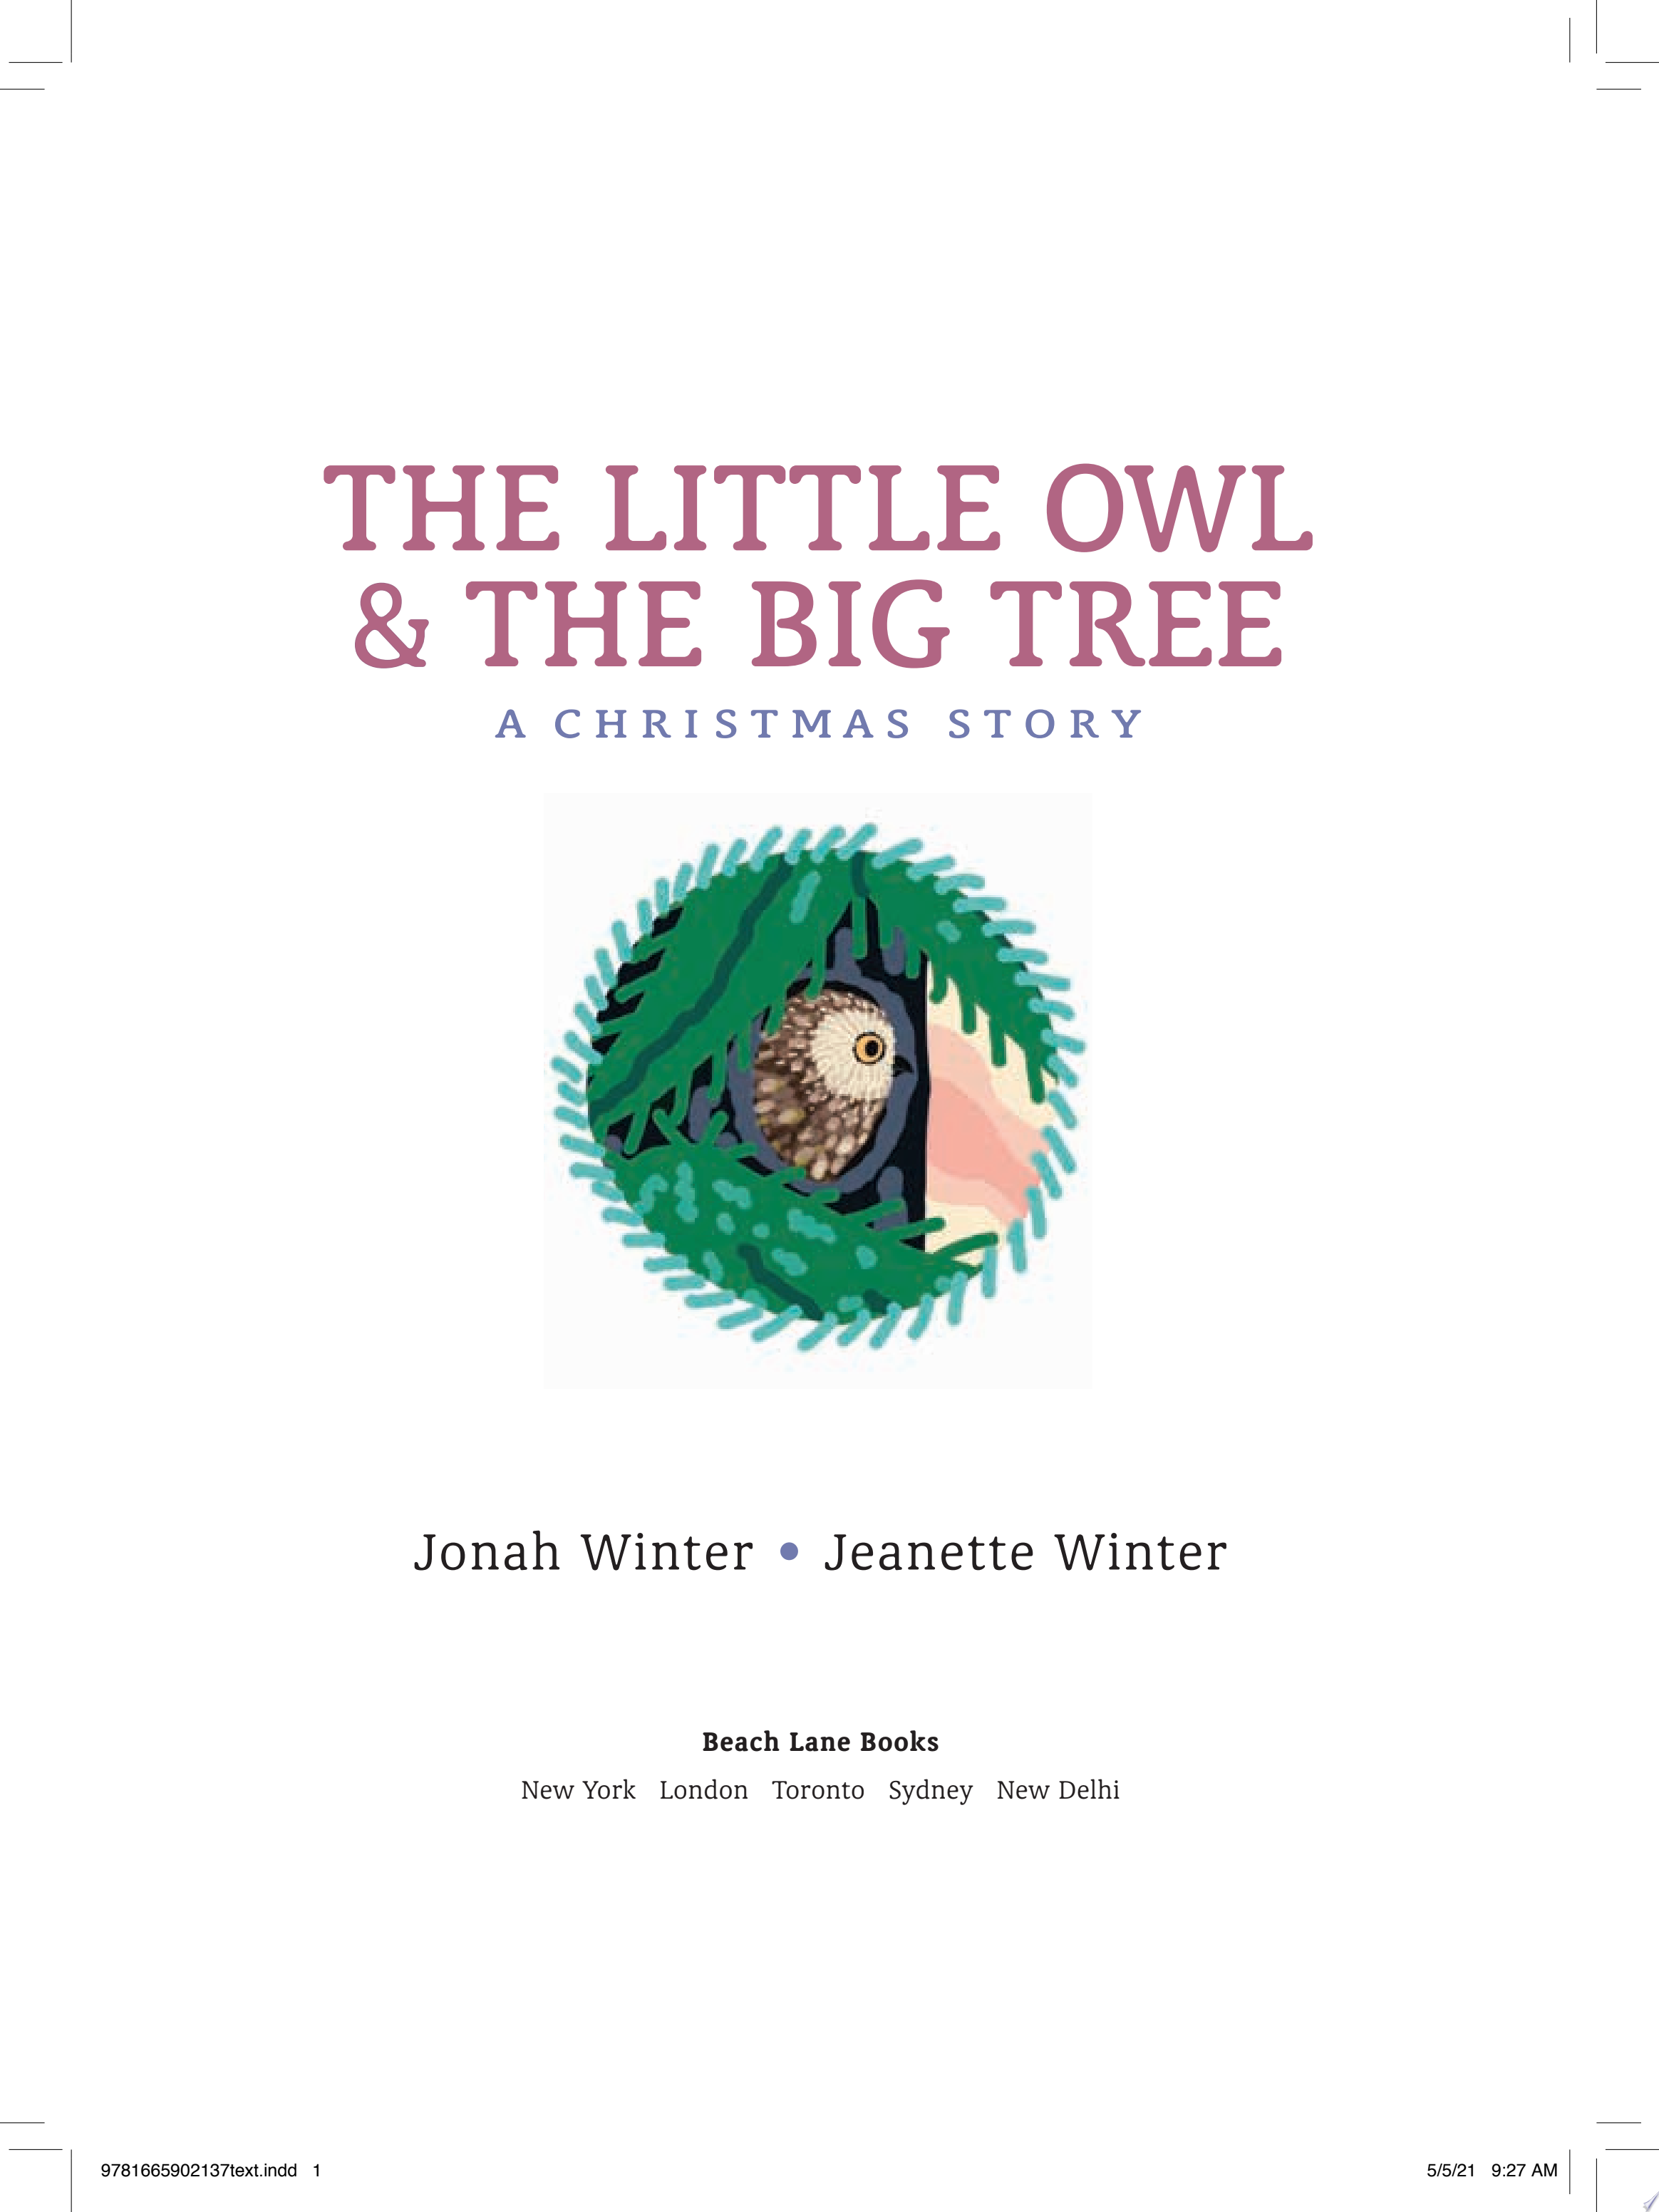 Image for "The Little Owl & the Big Tree"